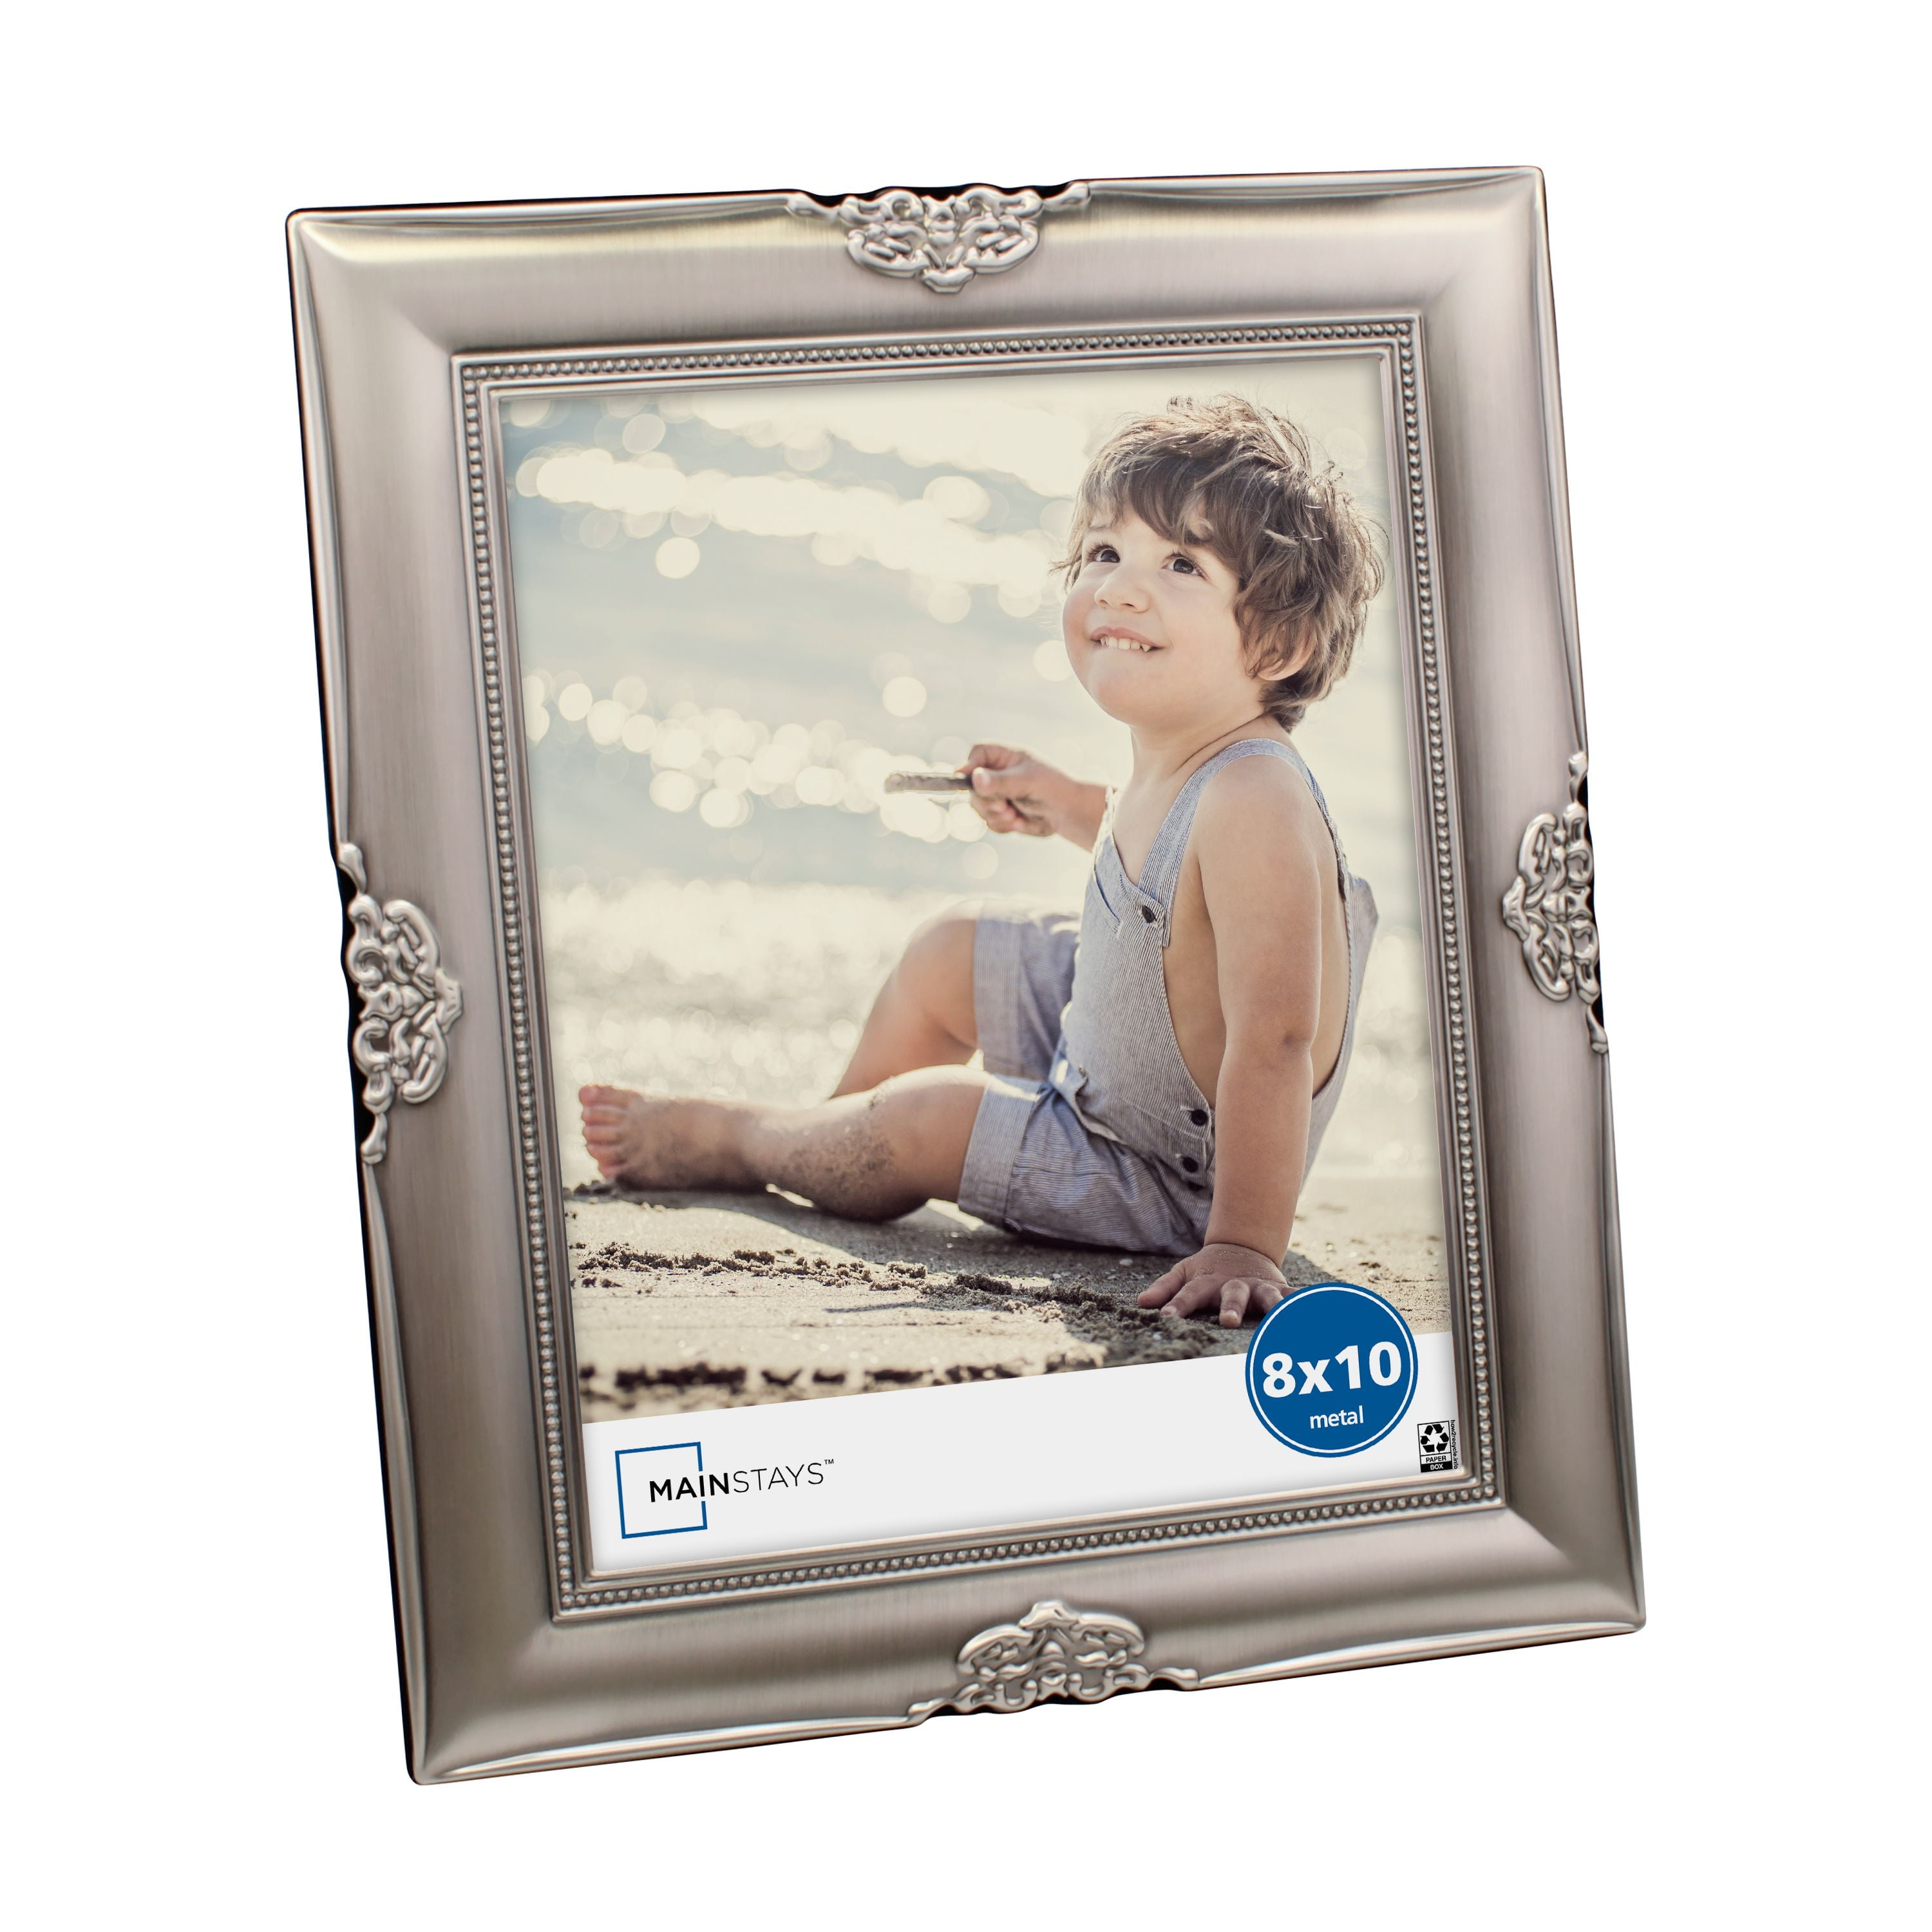 Barcelona Pewter Photo Frame 11x14, Matted to 8x10' 13 x 16-inch